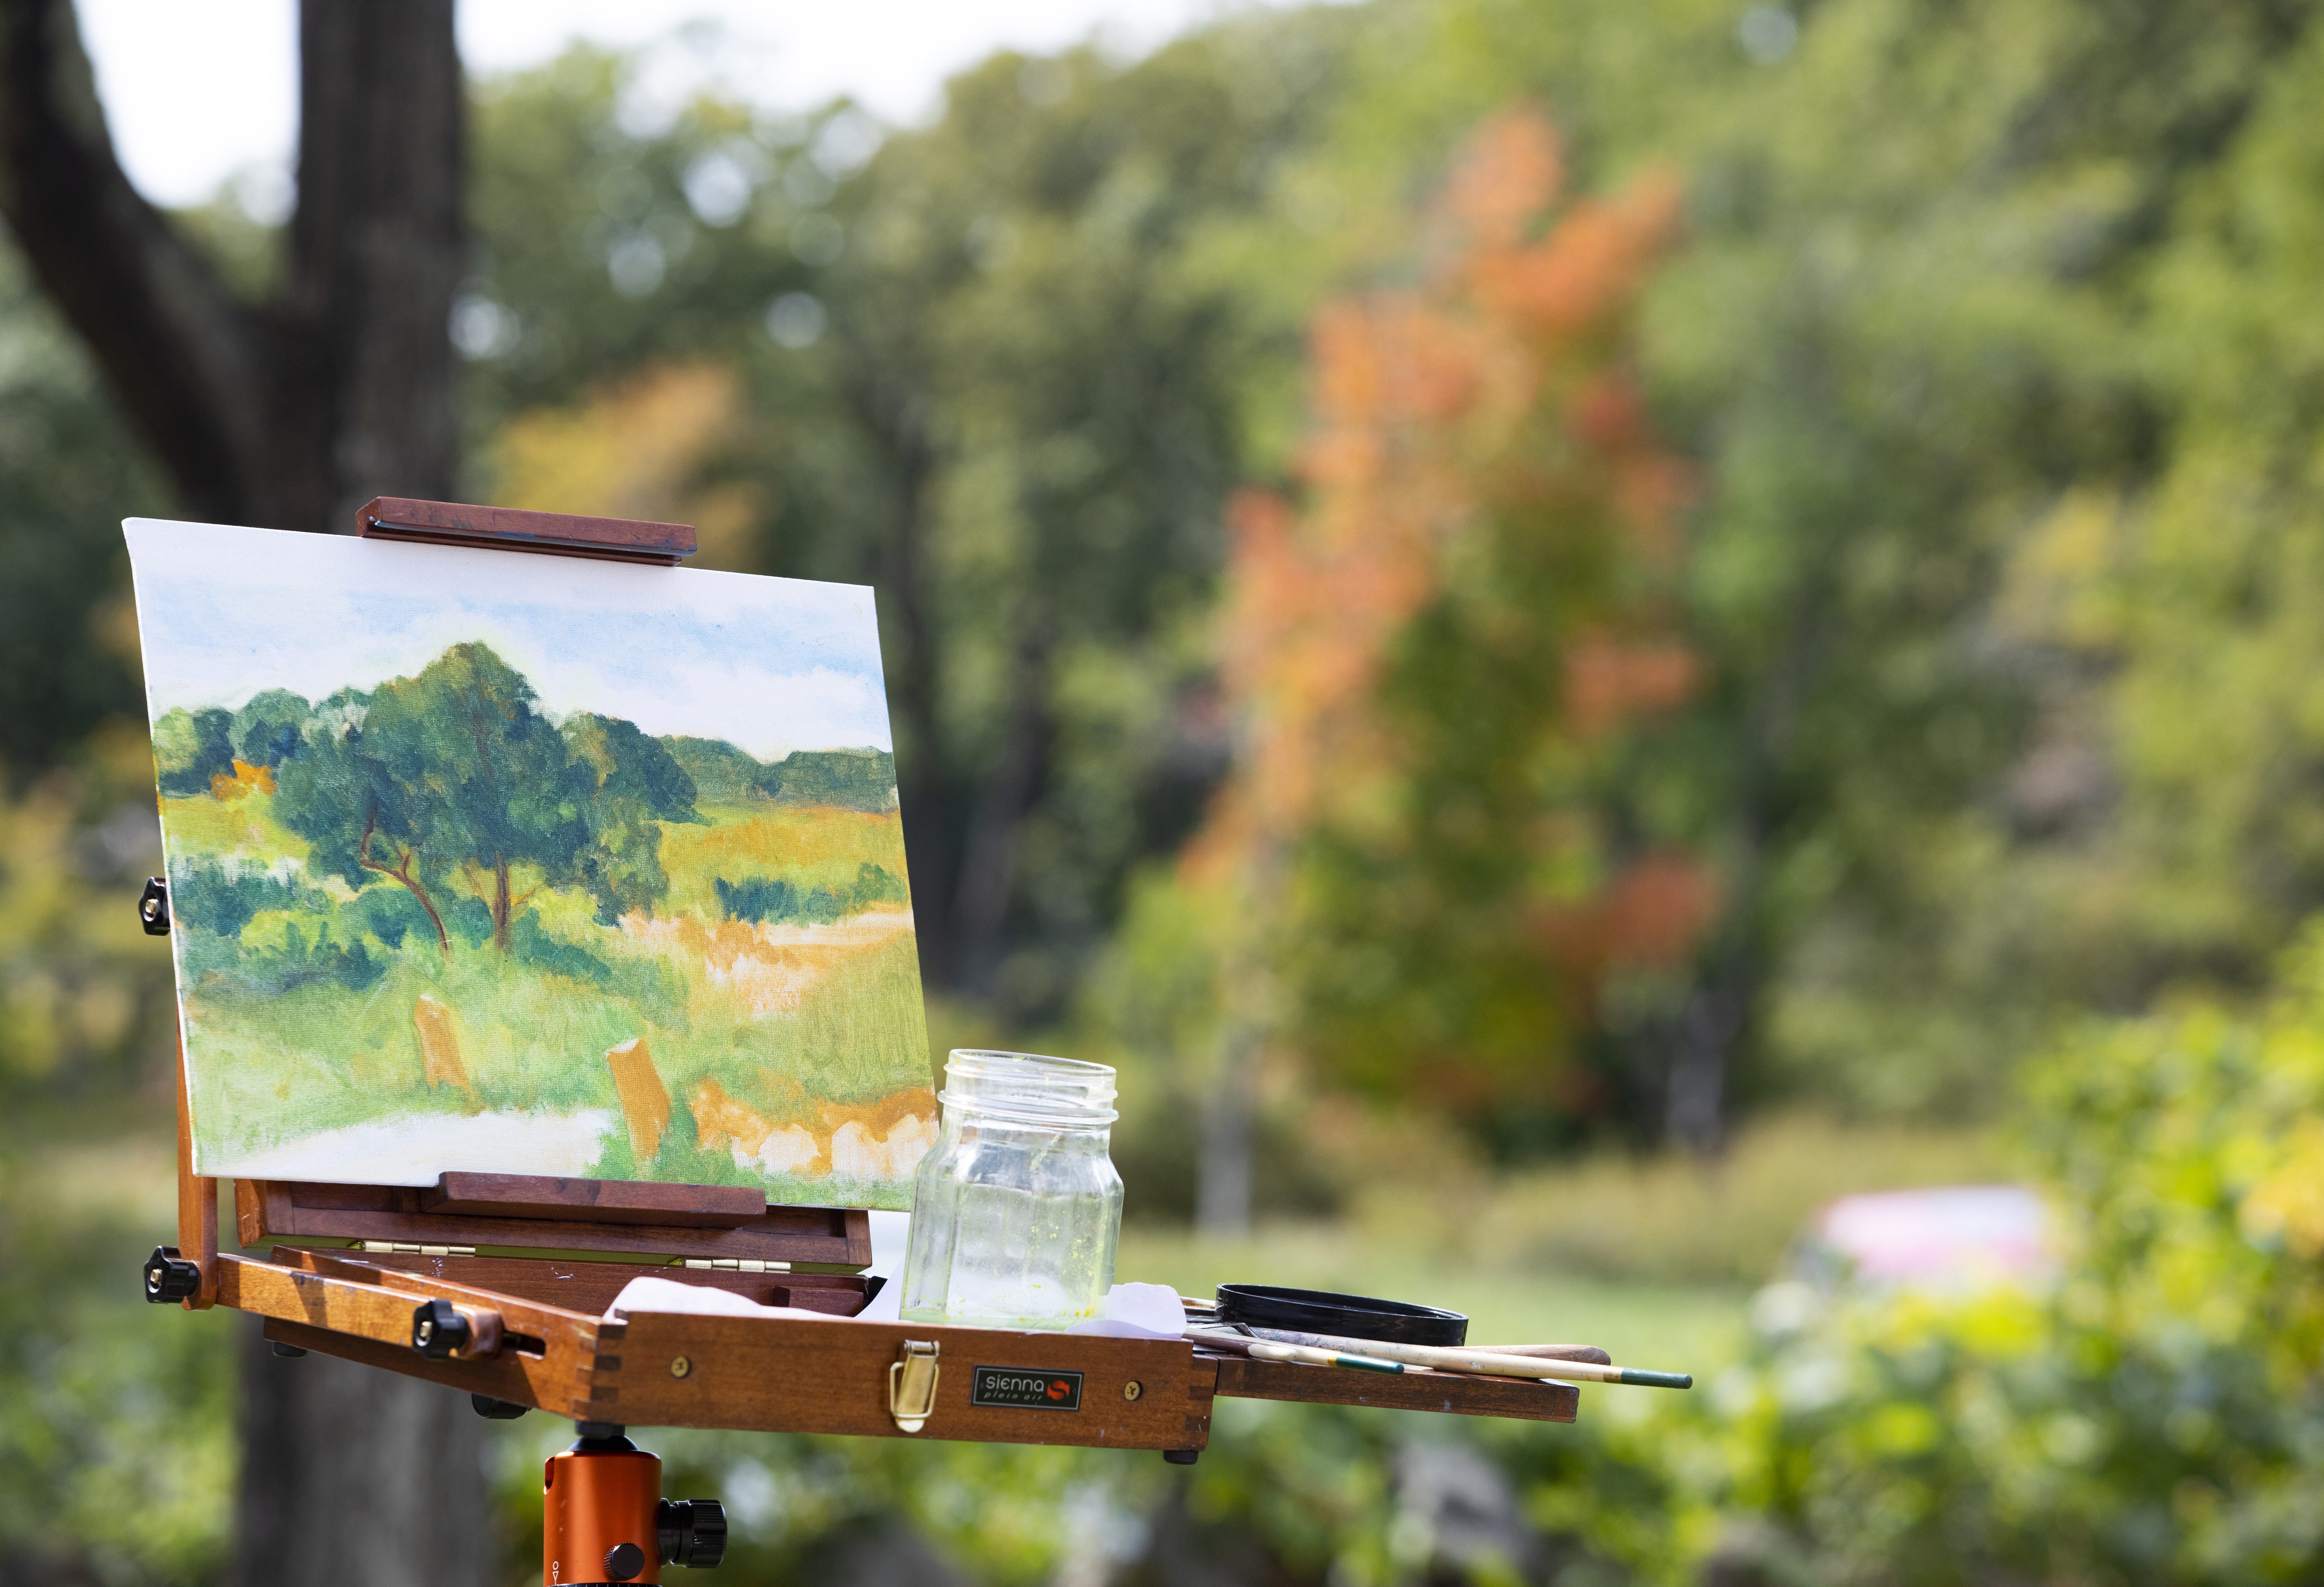 Sally Modest of Newton painted this during an outdoor painting class at Cogswell's Grant in Essex.